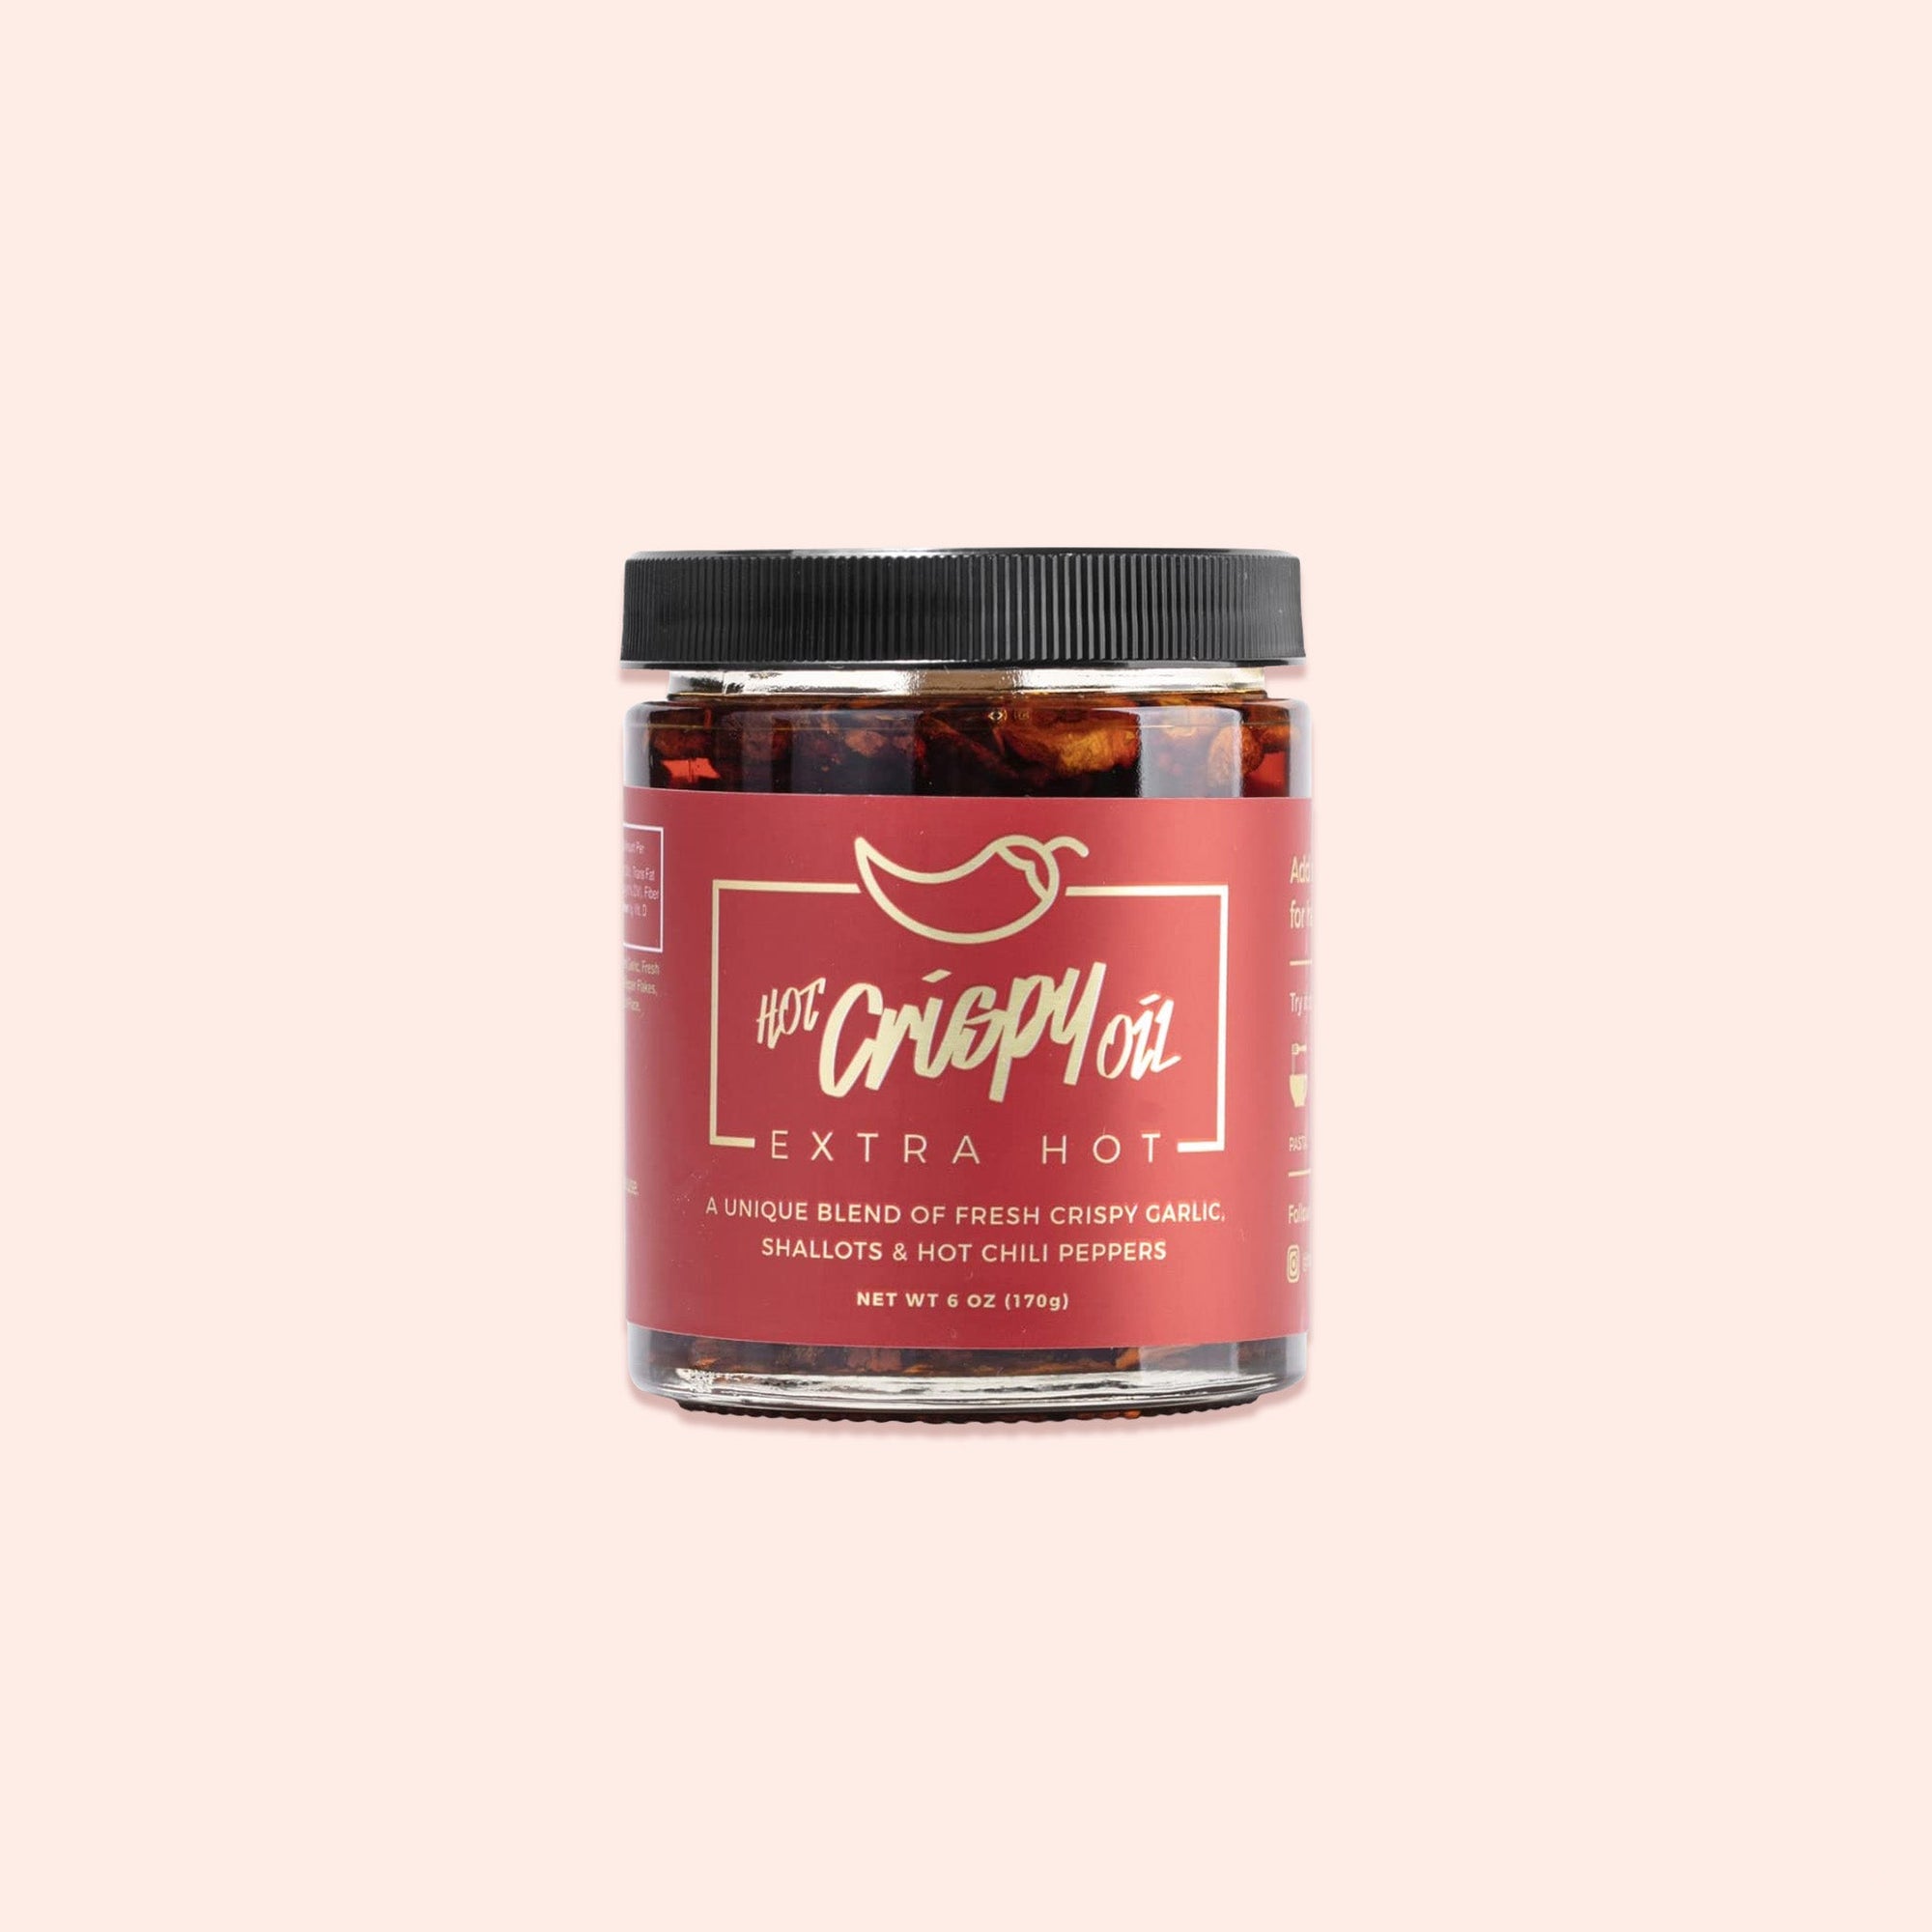 On a light pink background sits a jar with a black lid and black label. It has a gold outlined box and a chili pepper above it. It says in gold "HOT Crispy Oil EXTRA HOT." It also says in red "A UNIQUE BLEND OF FRESH CRISPY GARLIC, SHALLOTS & HOT CHILI PEPPERS." NET WT 6 OZ (170G)